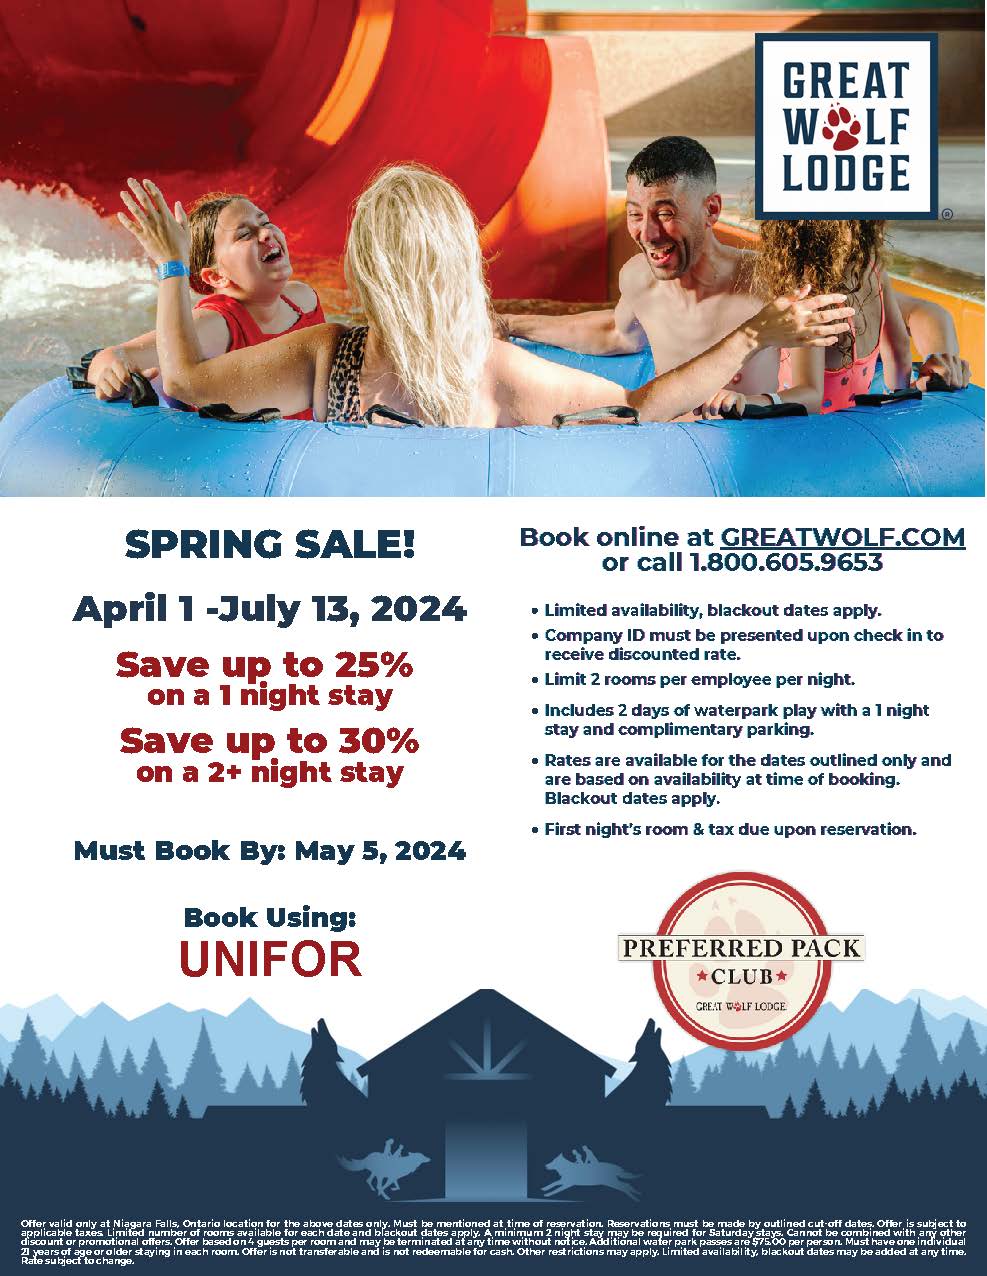 SPRING SALE! April 1 -July 13, 2024 Save up to 25% on a 1 night stay Save up to 30% on a 2+ night stay Must Book By: May 5, 2024 Book Using: UNIFOR Book online at GREATWOLF.COM or call 1.800.605.9653 Limited availability, blackout dates apply. Company ID must be presented upon check in to receive discounted rate. Limit 2 rooms per employee per night. Includes 2 days of waterpark play with a 1 night stay and complimentary parking. Rates are available for the dates outlined only and are based on availability at time of booking. Blackout dates apply. First night’s room & tax due upon reservation.